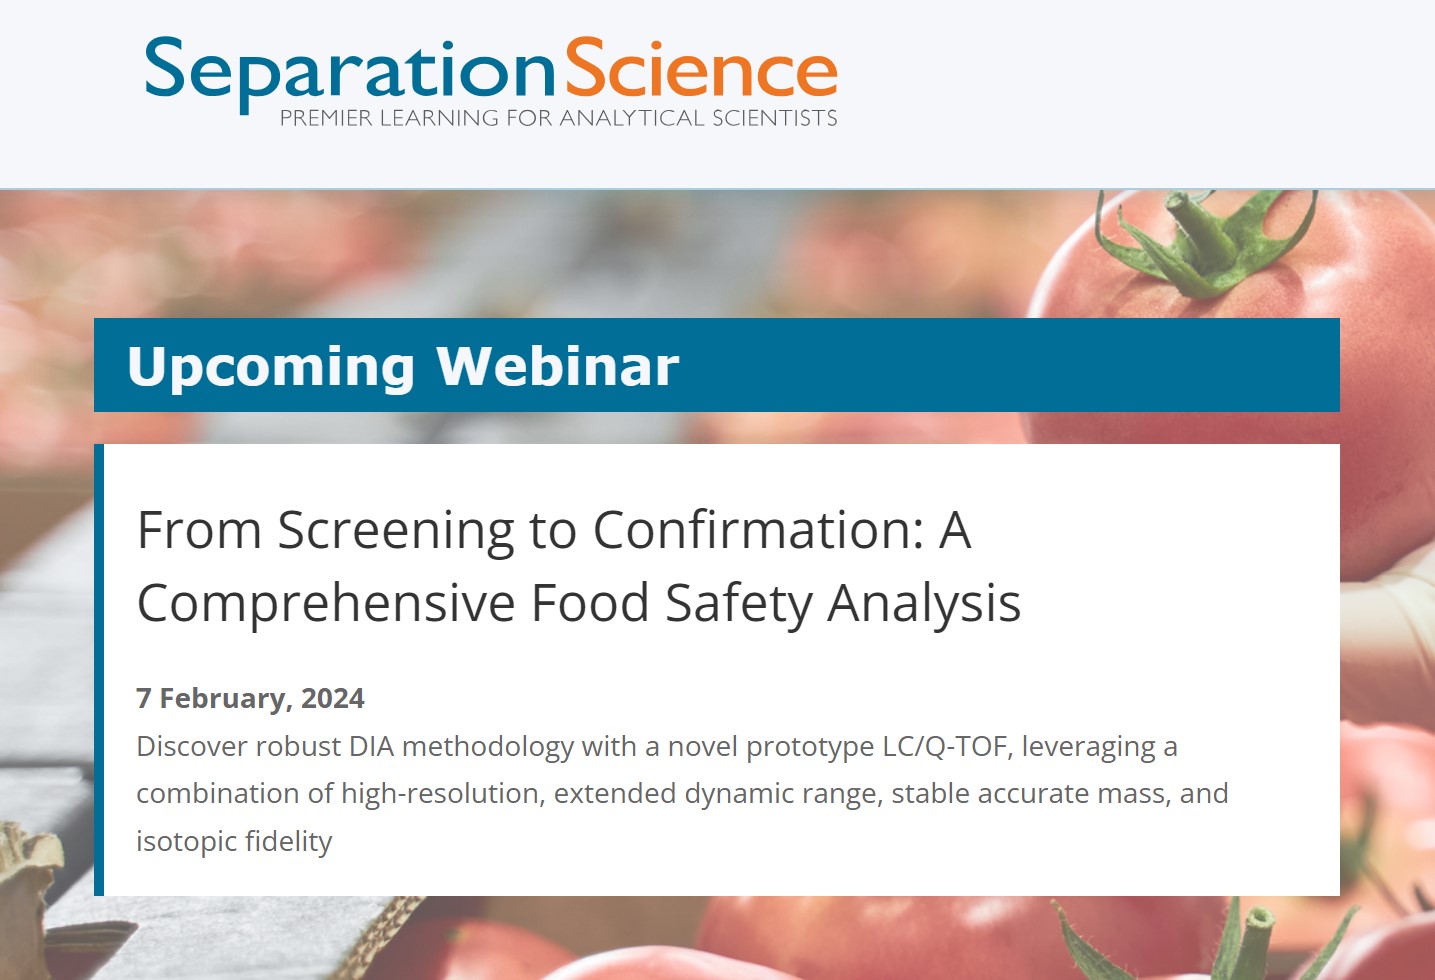 Separation Science: From Screening to Confirmation: A Comprehensive Food Safety Analysis